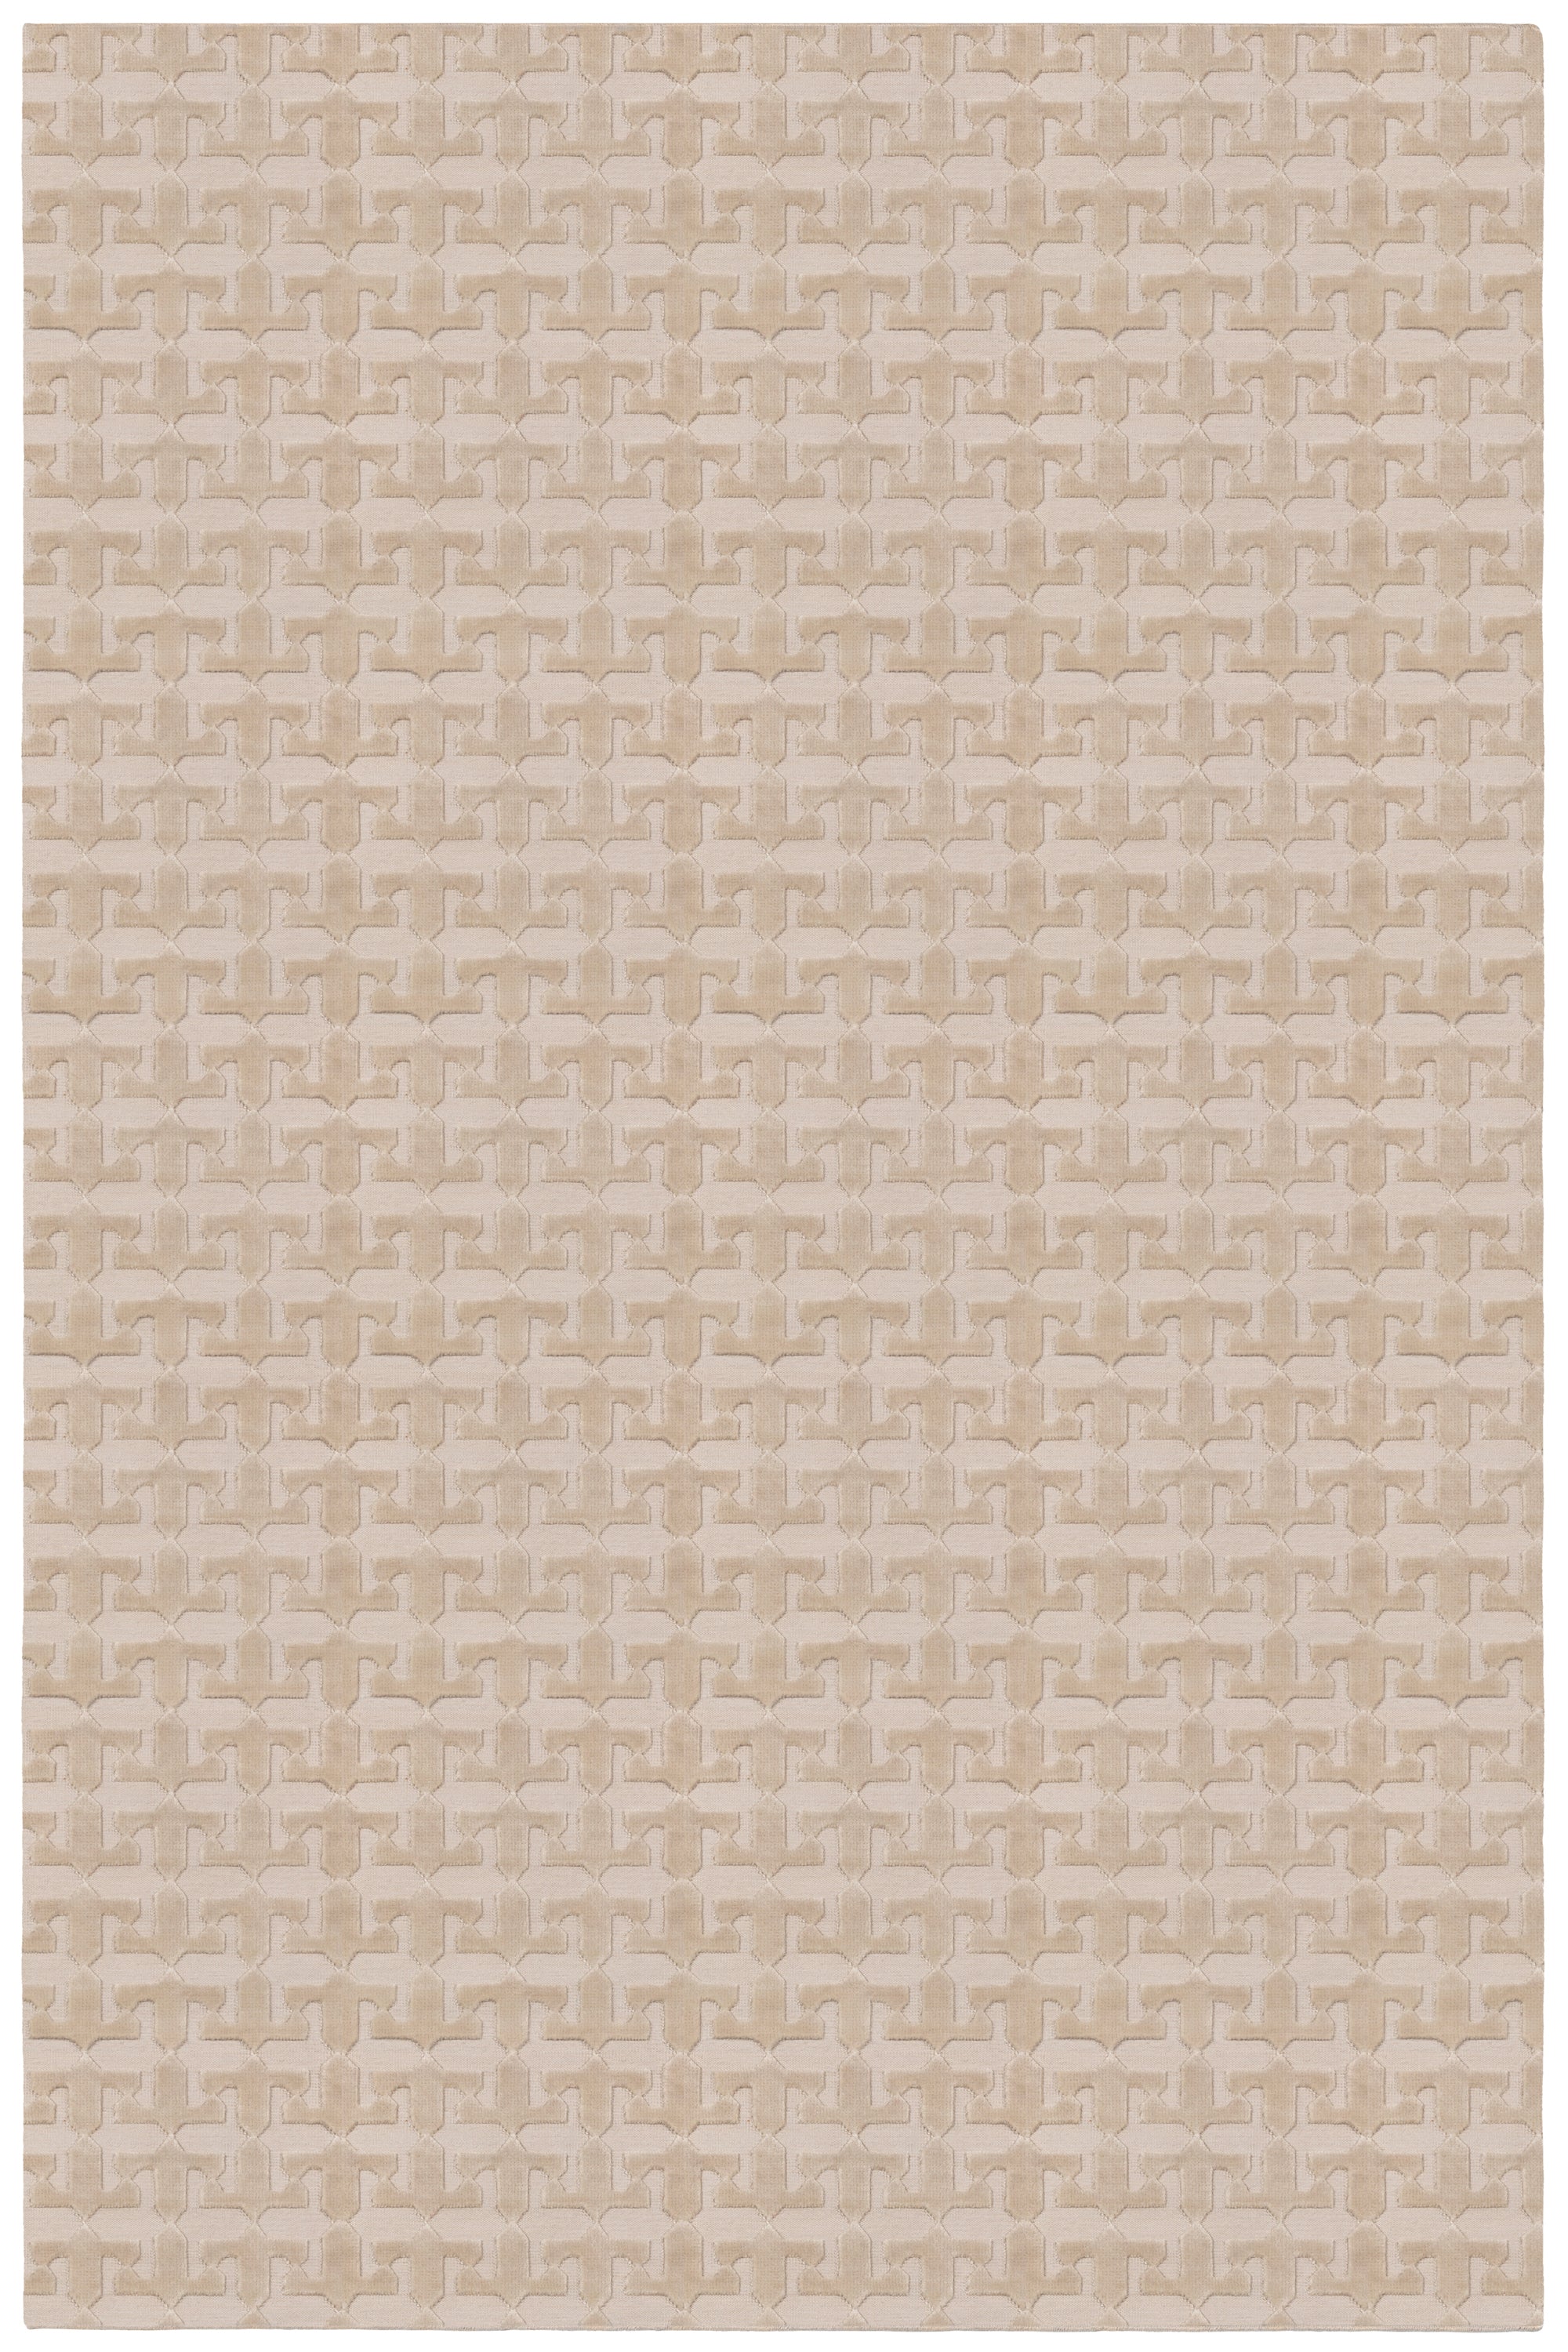 Full size Iseo Rug in Pearl, a textural monochromatic abstract geometric pattern in ivory. 